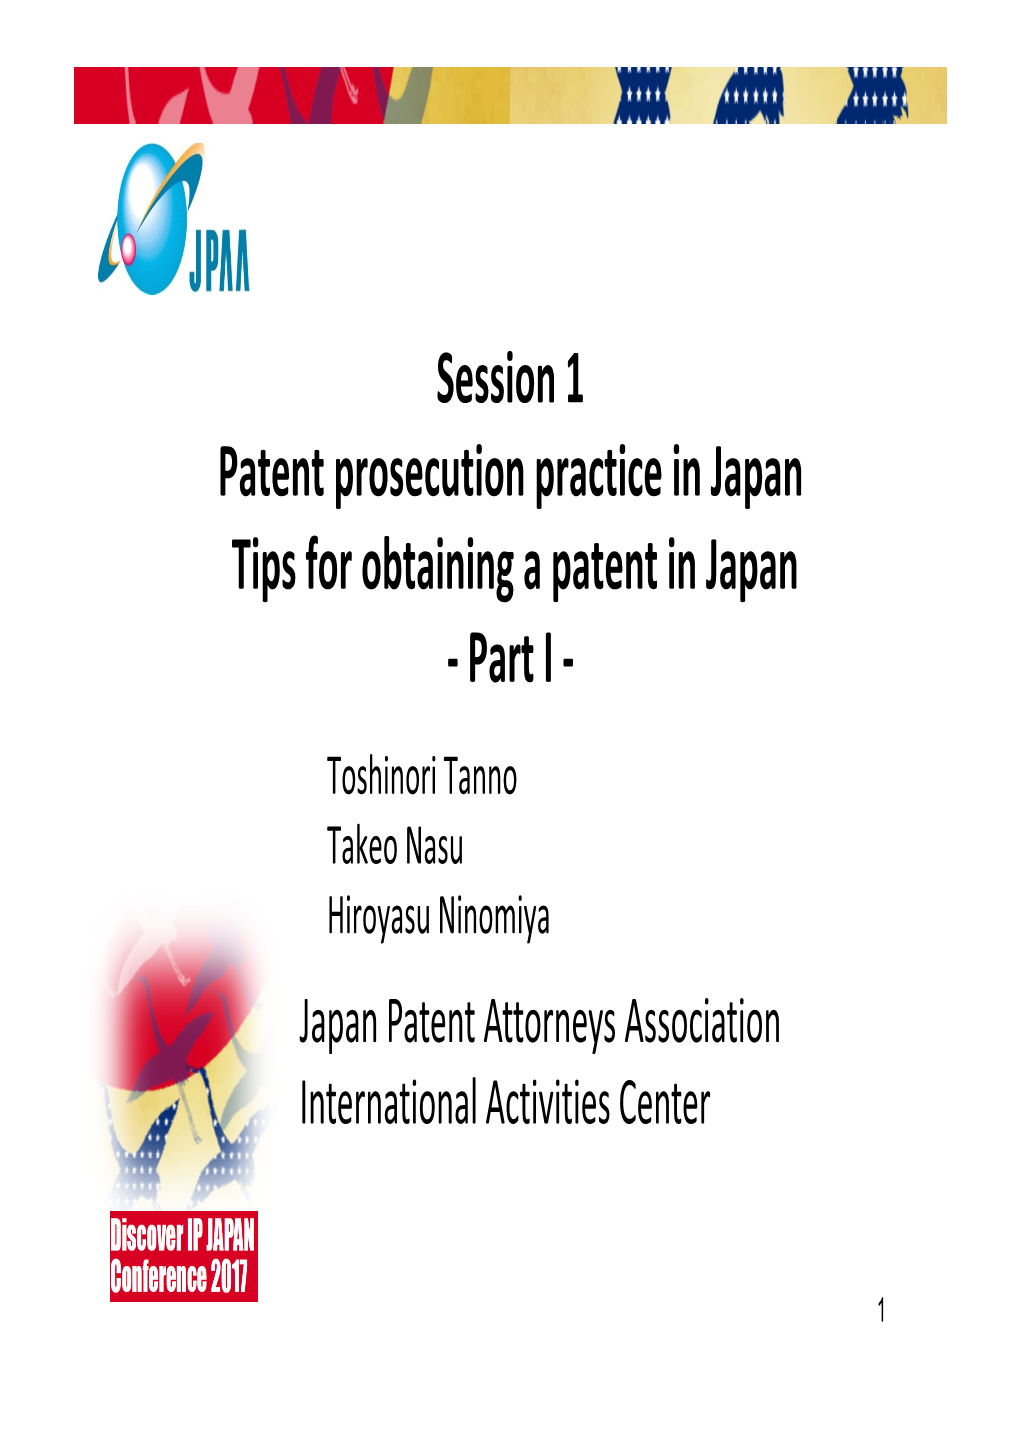 Session 1 Patent Prosecution Practice in Japan Tips for Obtaining a Patent